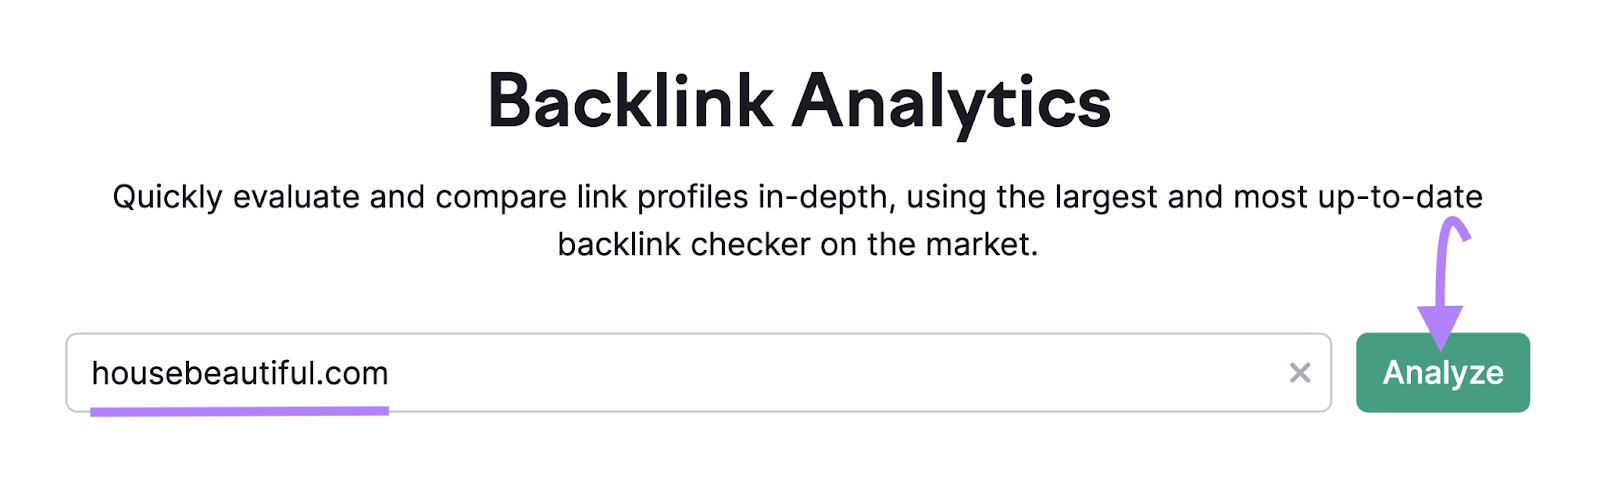 "housebeautiful.com" entered into the Backlink Analytics tool